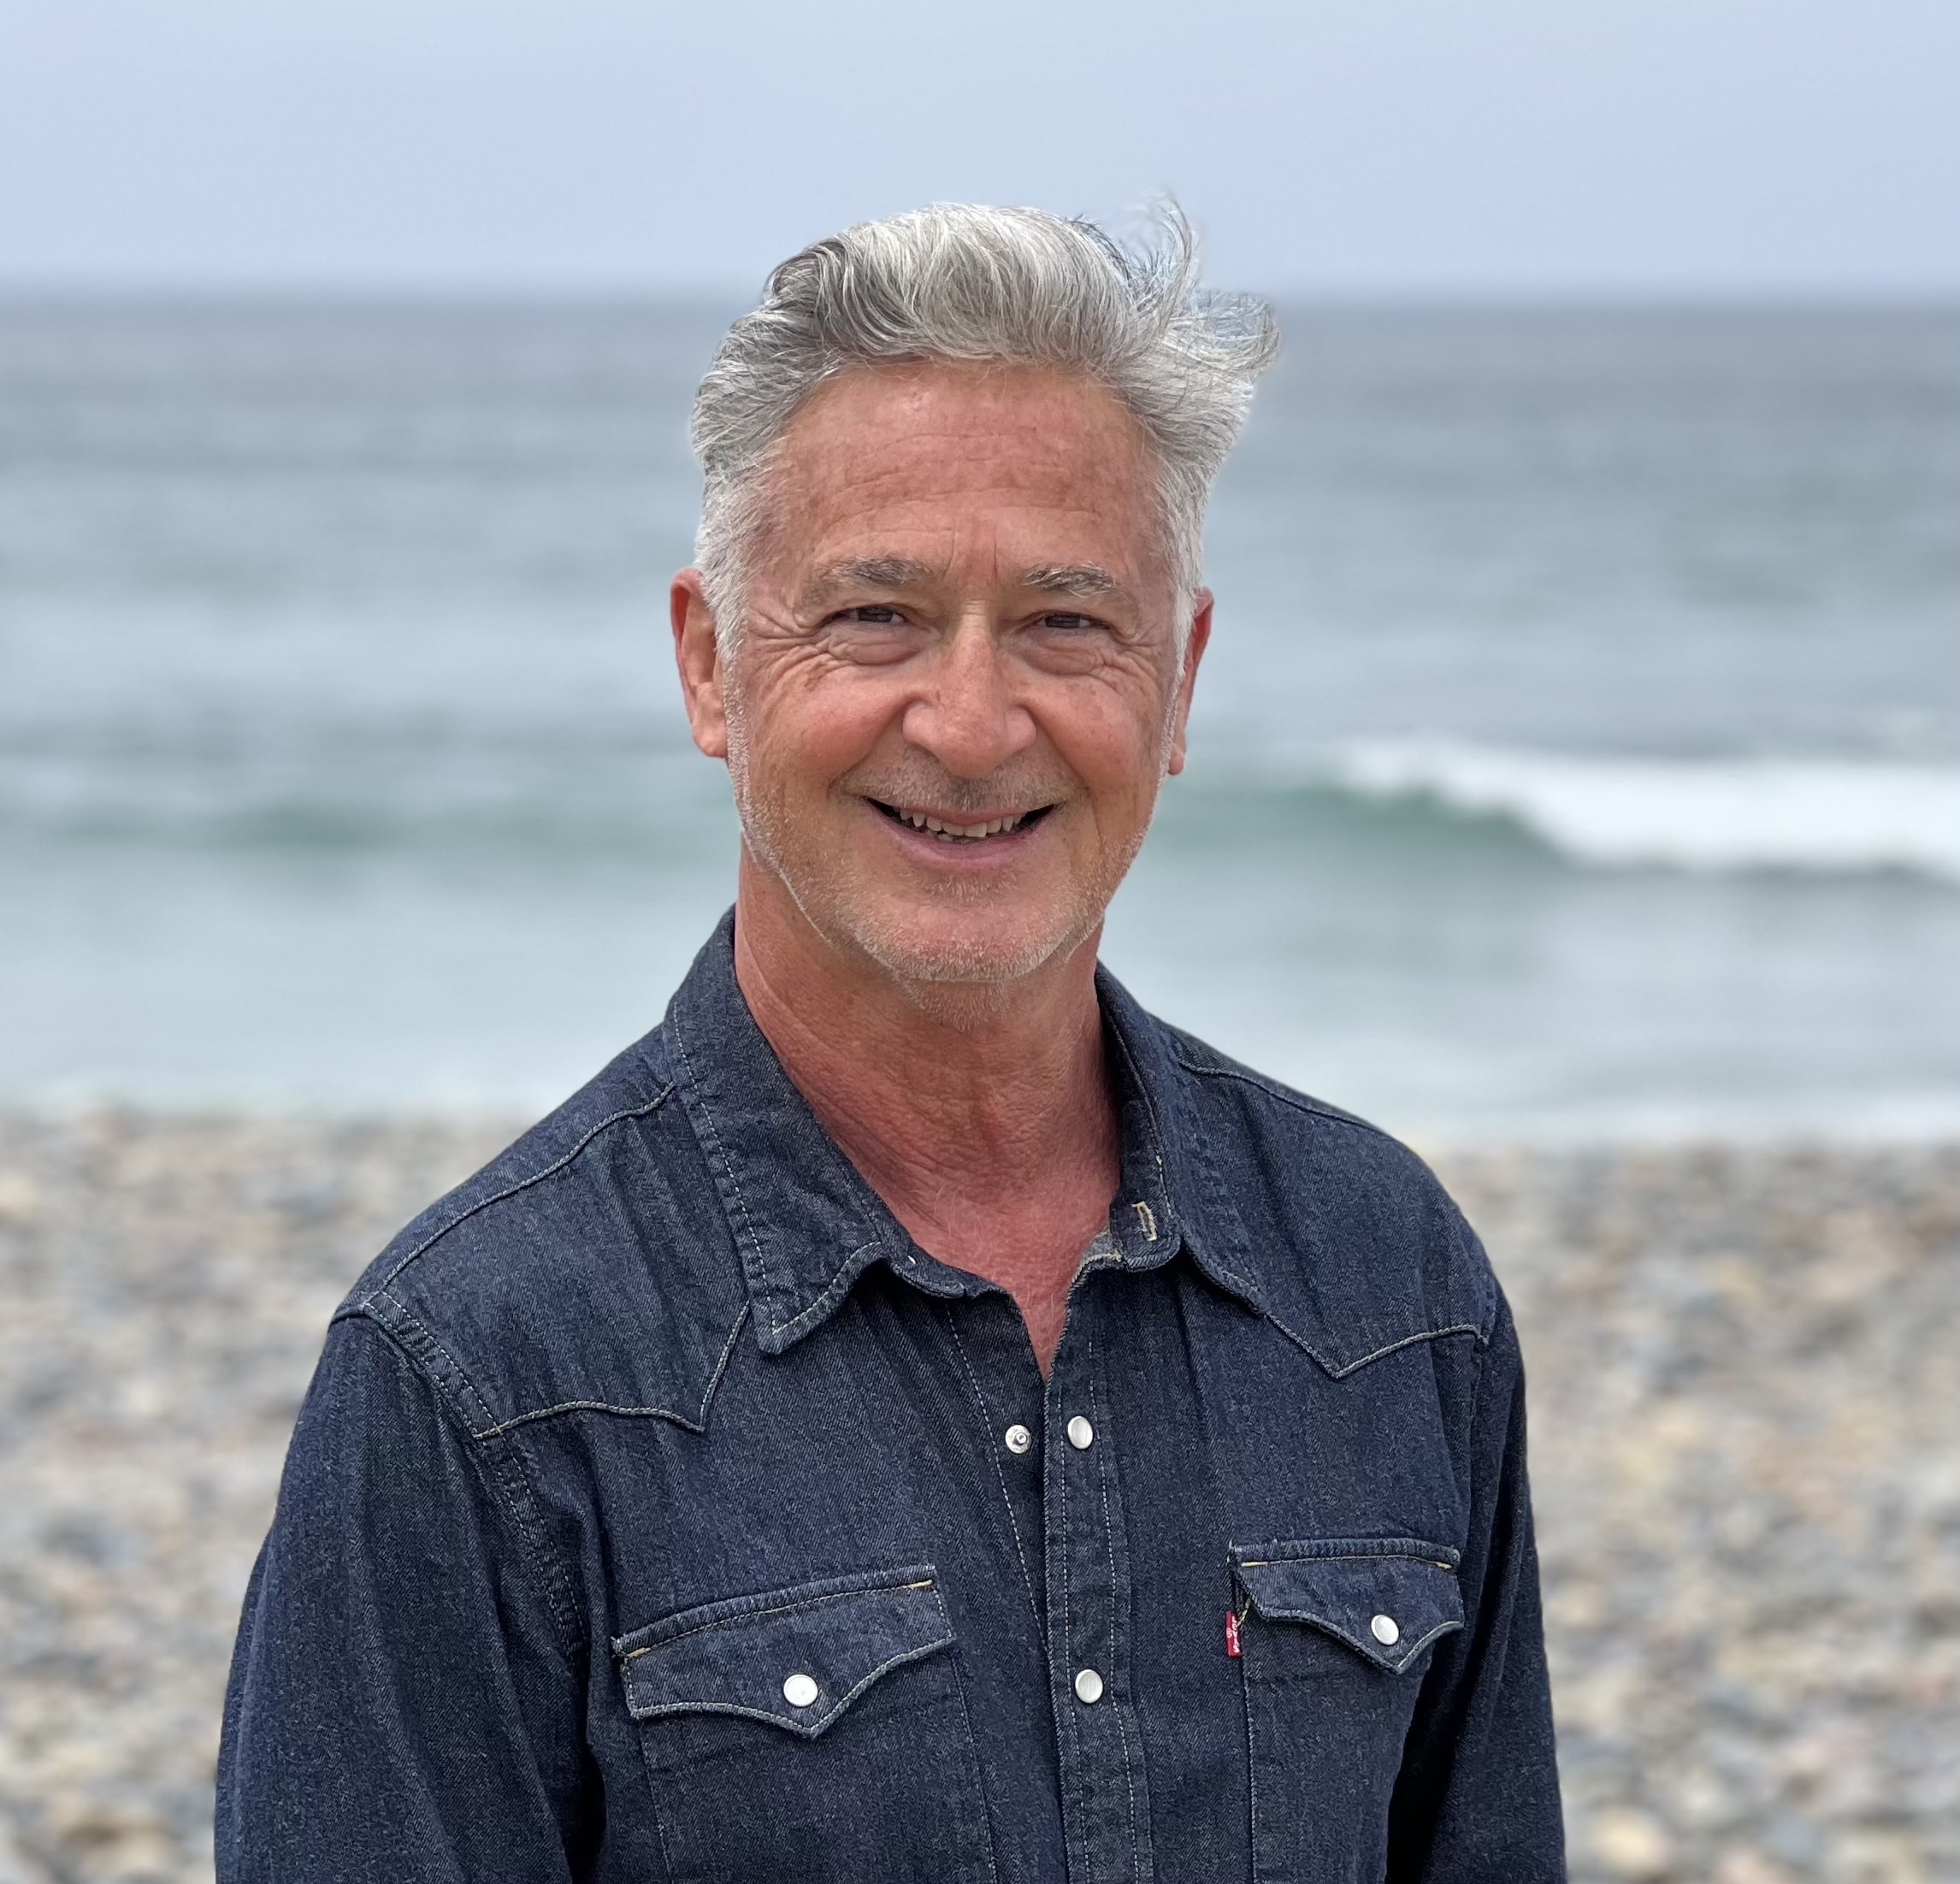 A man with grey hair and a blue button up smiles at the camera on the beach.